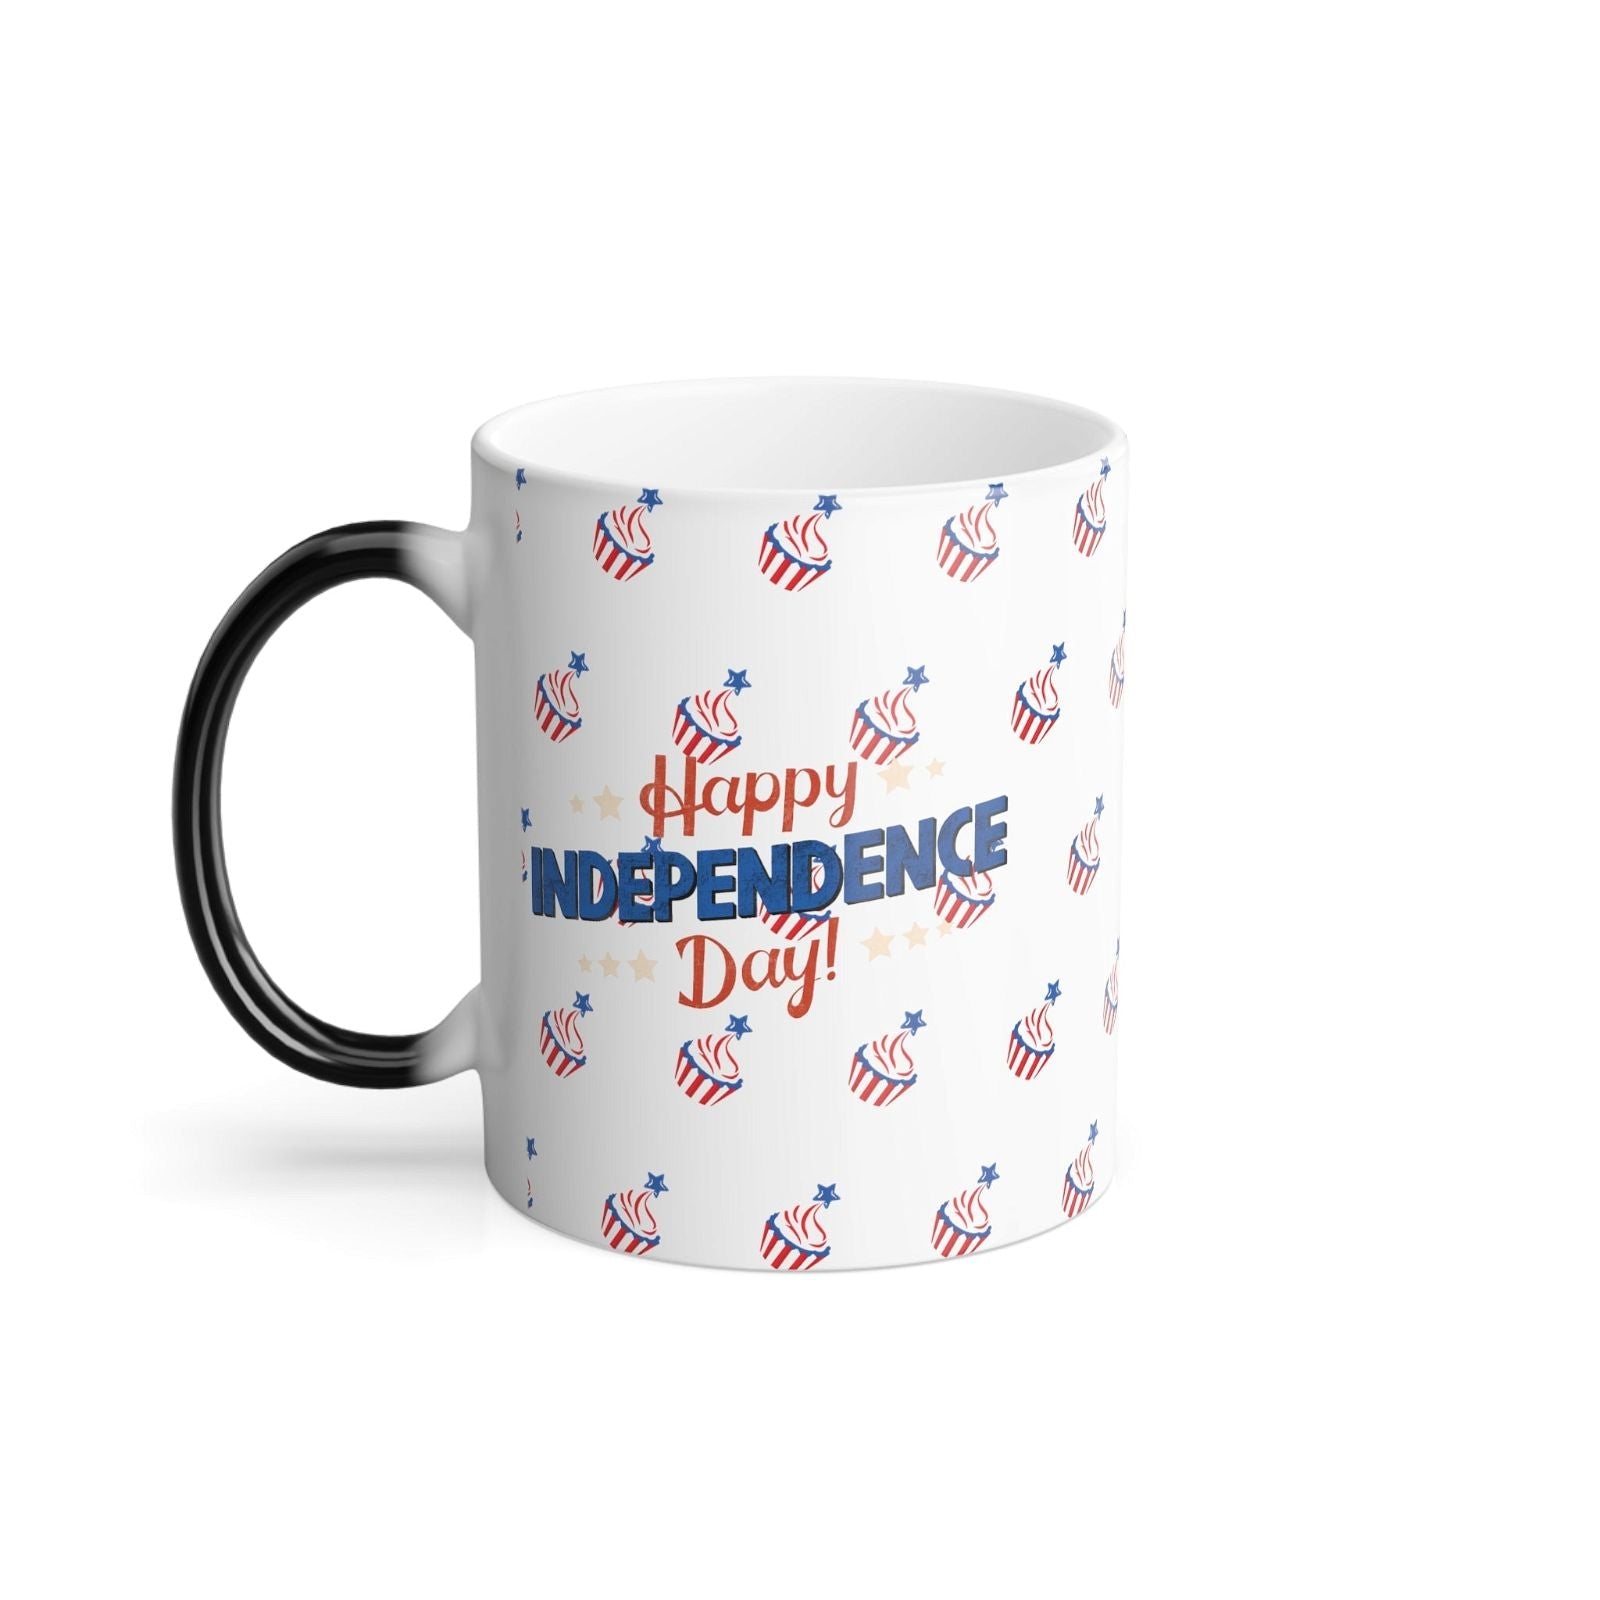 Happy 4th of july - Morphing mugs - Alex's Store - 11oz - 